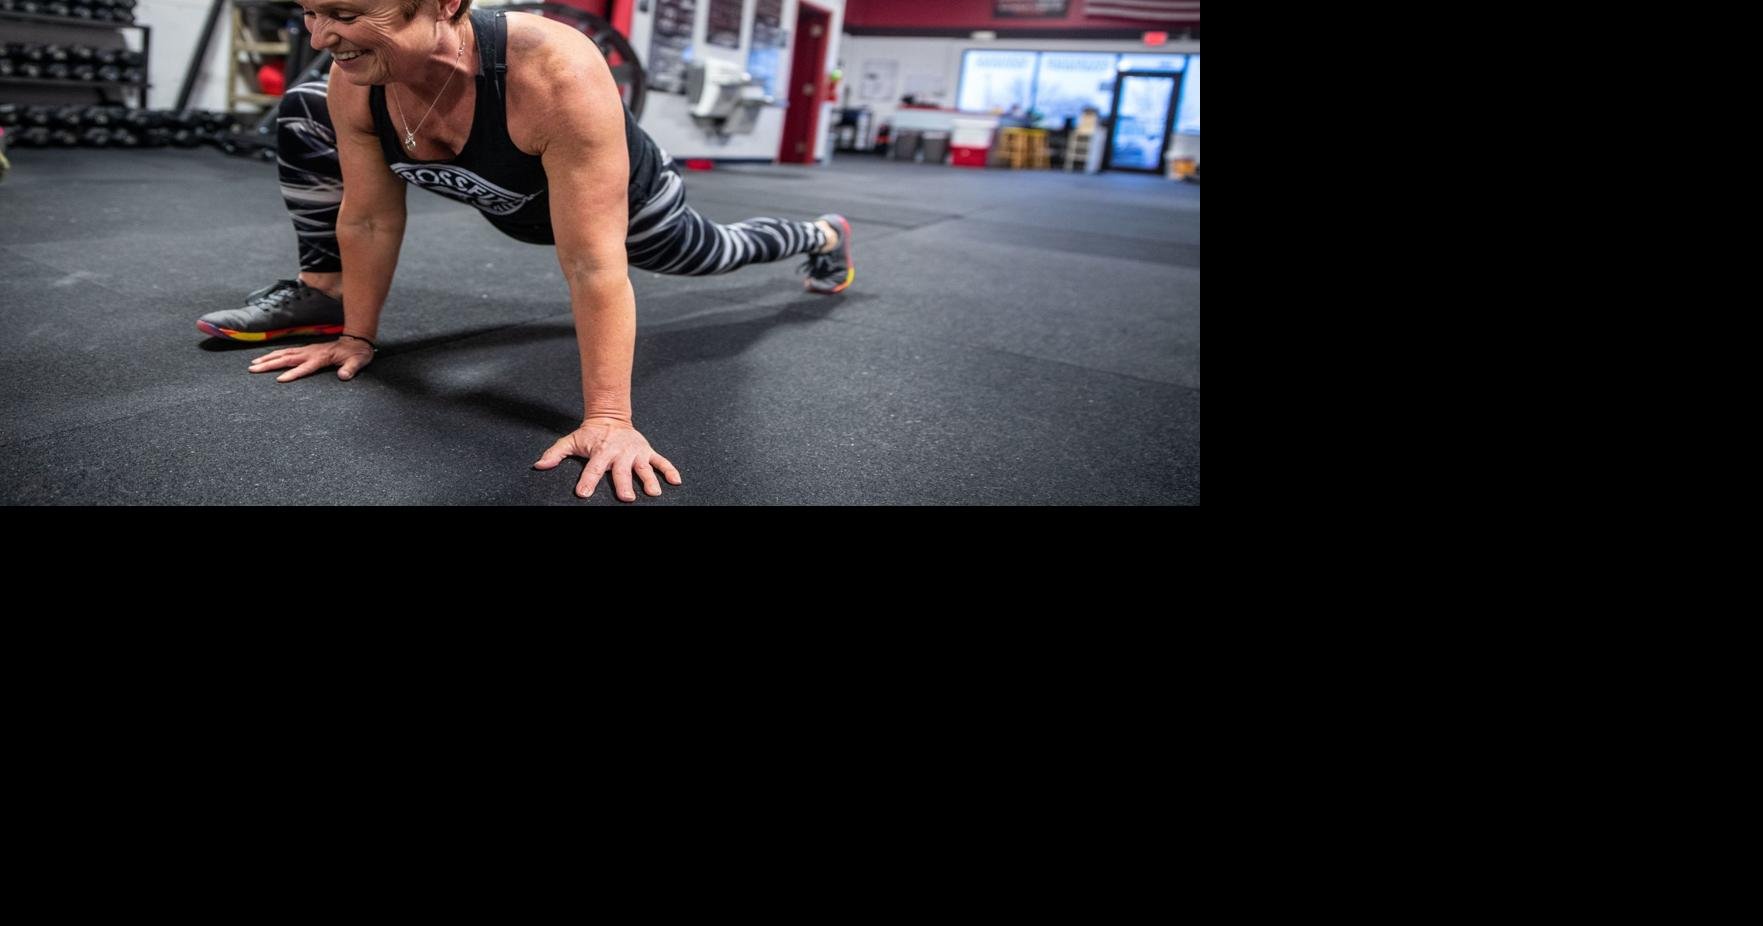 The Push-Up Plateau: Why You Need More Than Just Push-Ups to Build Strength, by Gary Foo